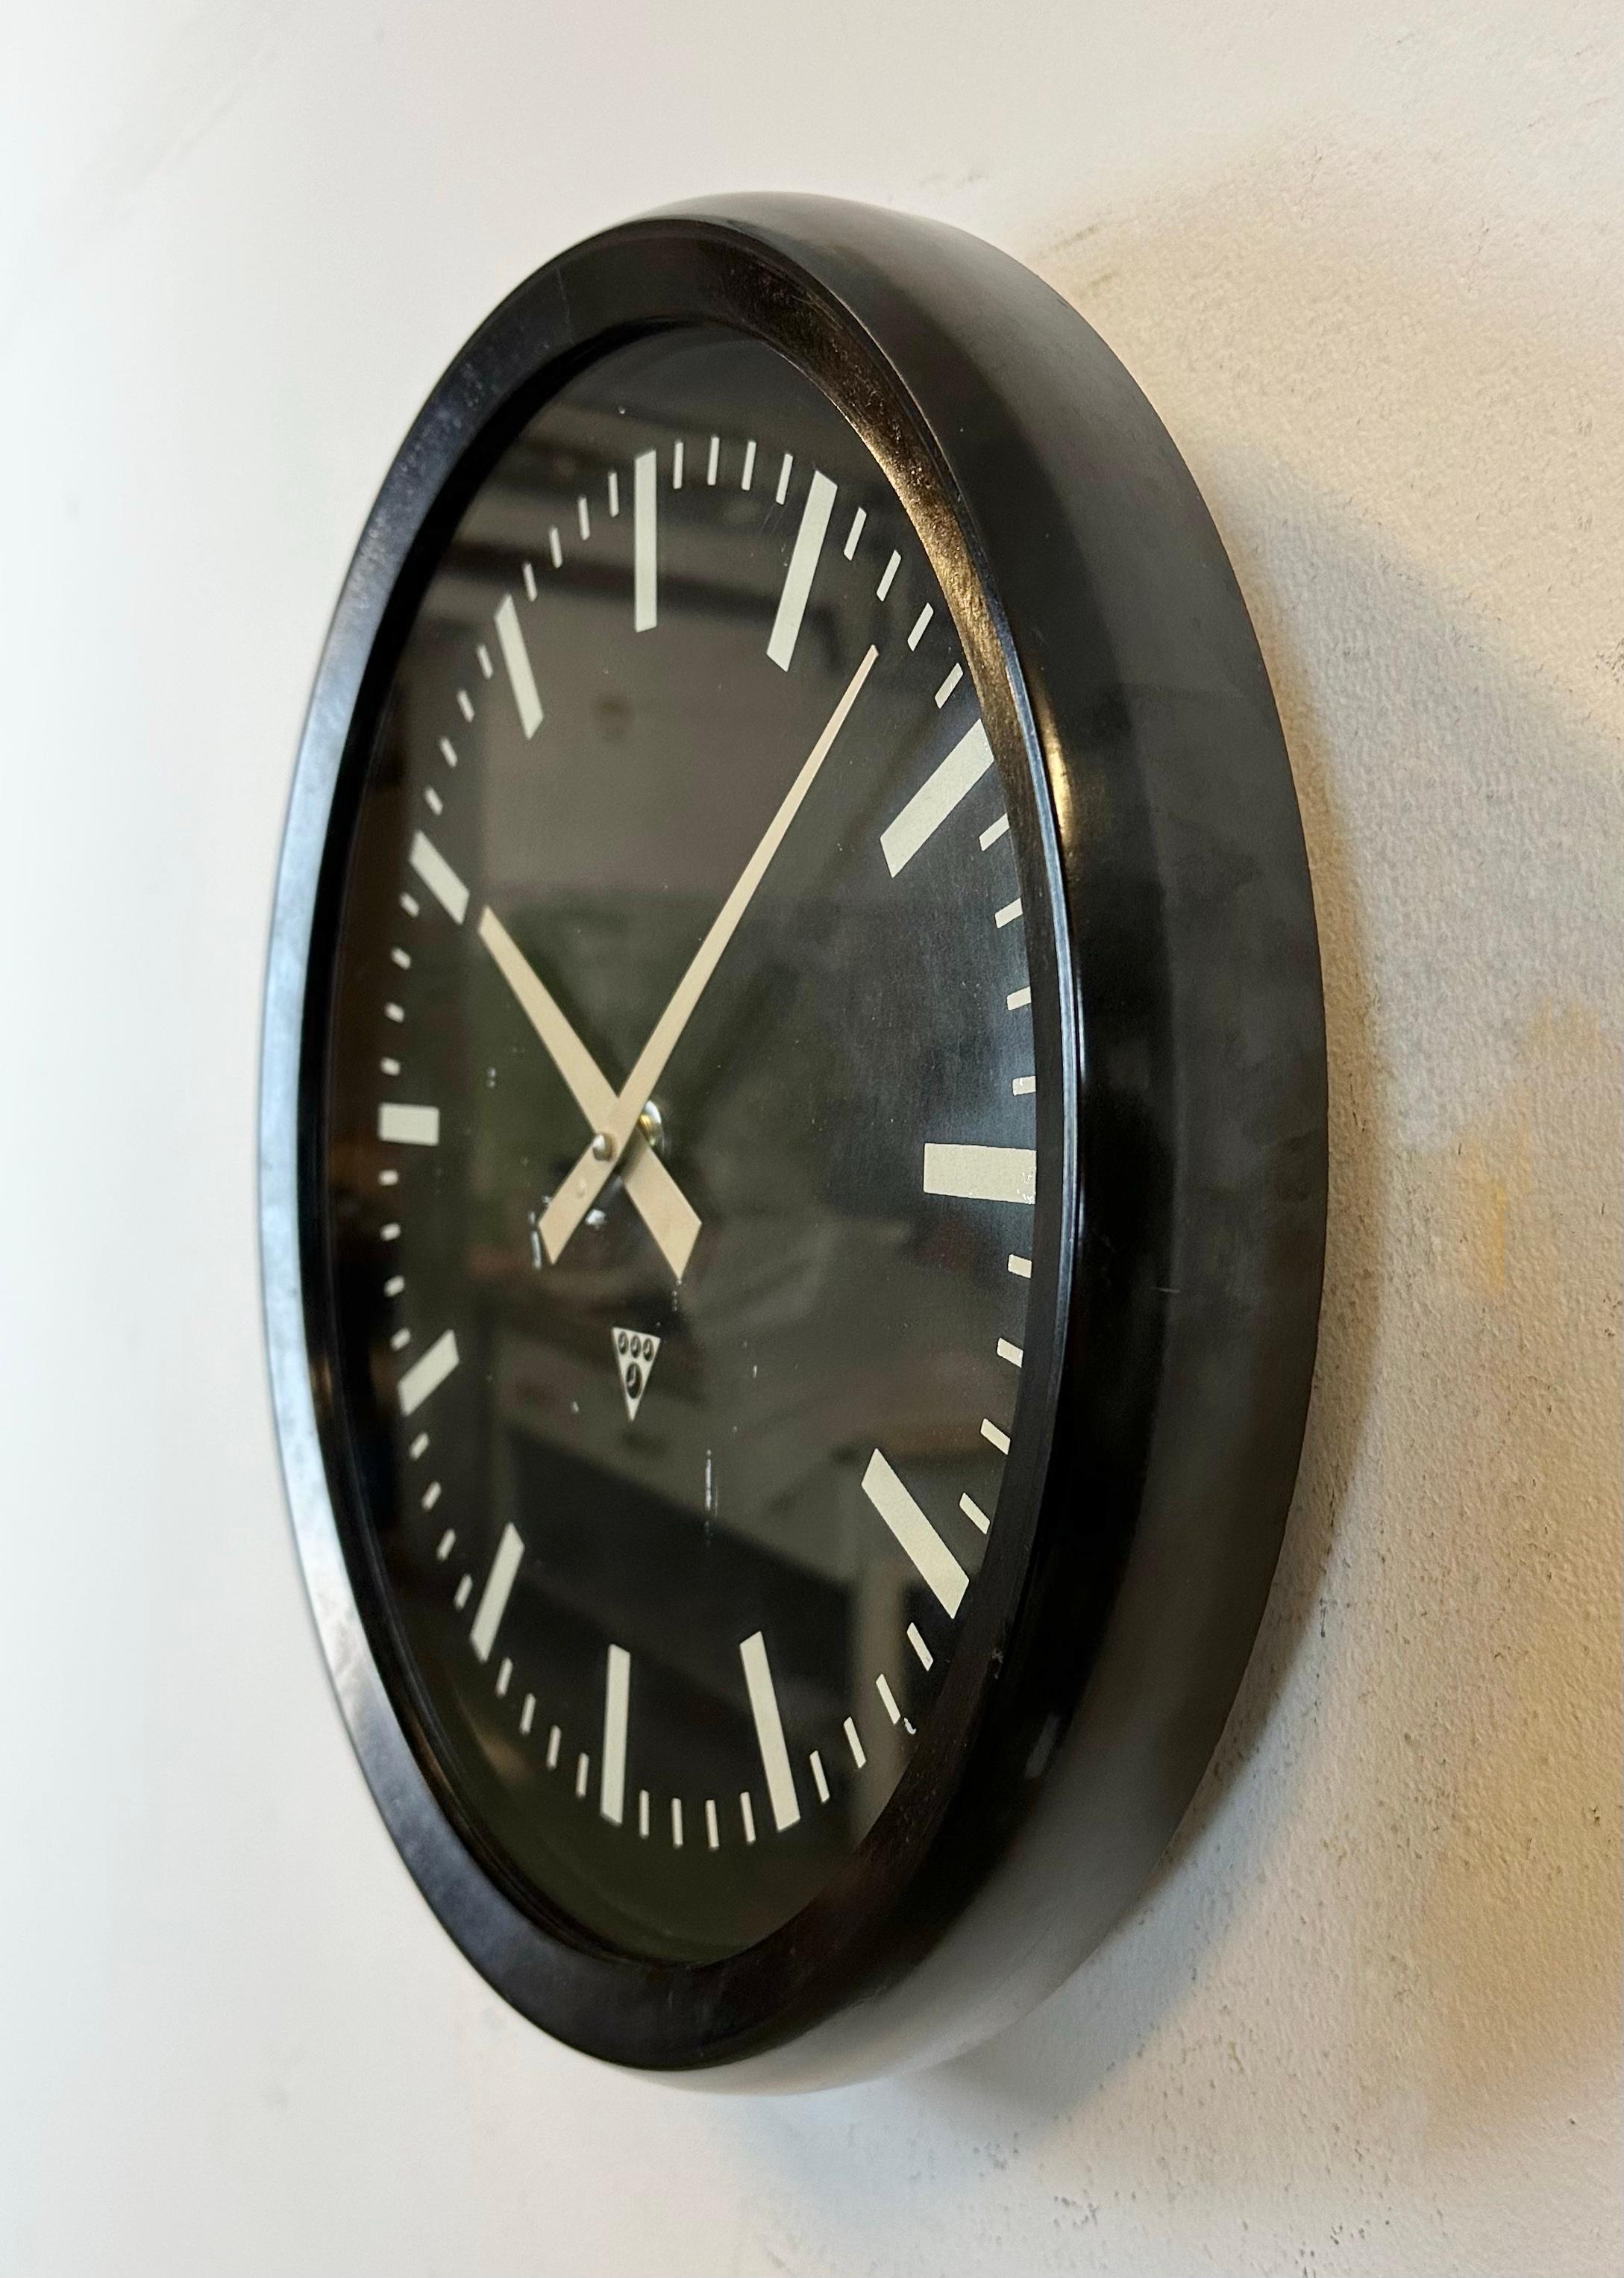 This wall clock was produced by Pragotron in former Czechoslovakia during the 1970s. The piece features a dark brown (black) bakelite frame, a black bakelite dial, an aluminum hands and a clear glass cover. The piece has been converted into a